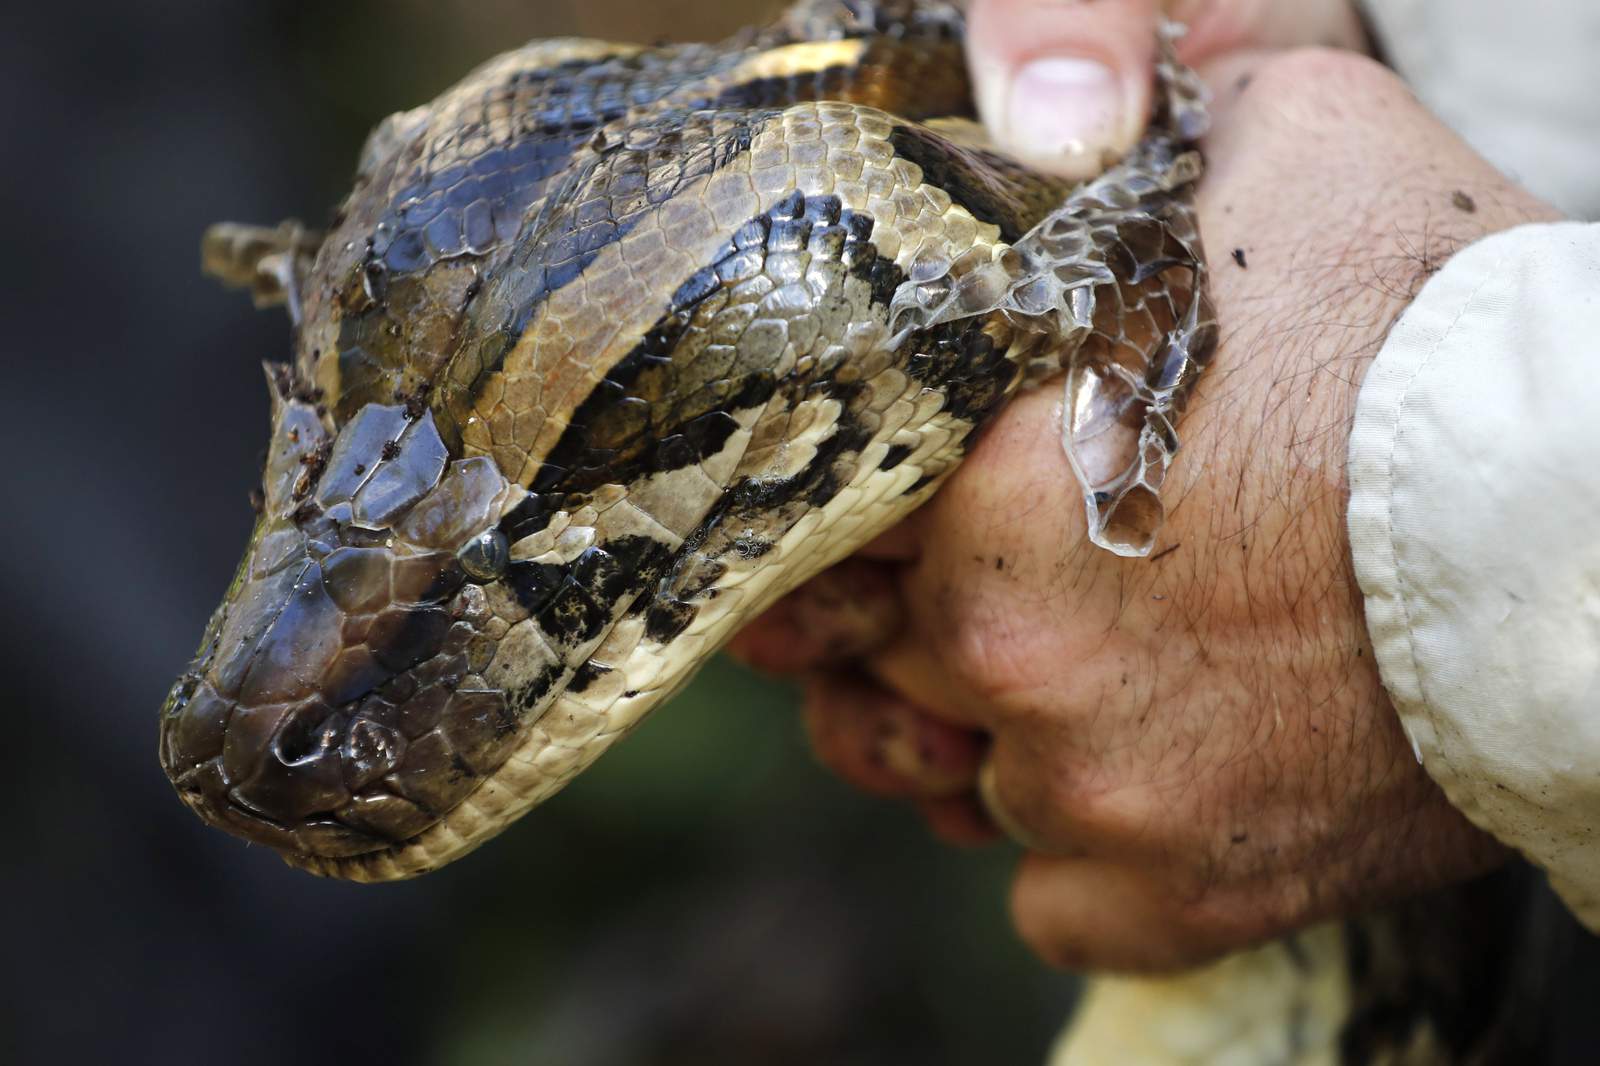 Thousands of invasive pythons removed from Everglades